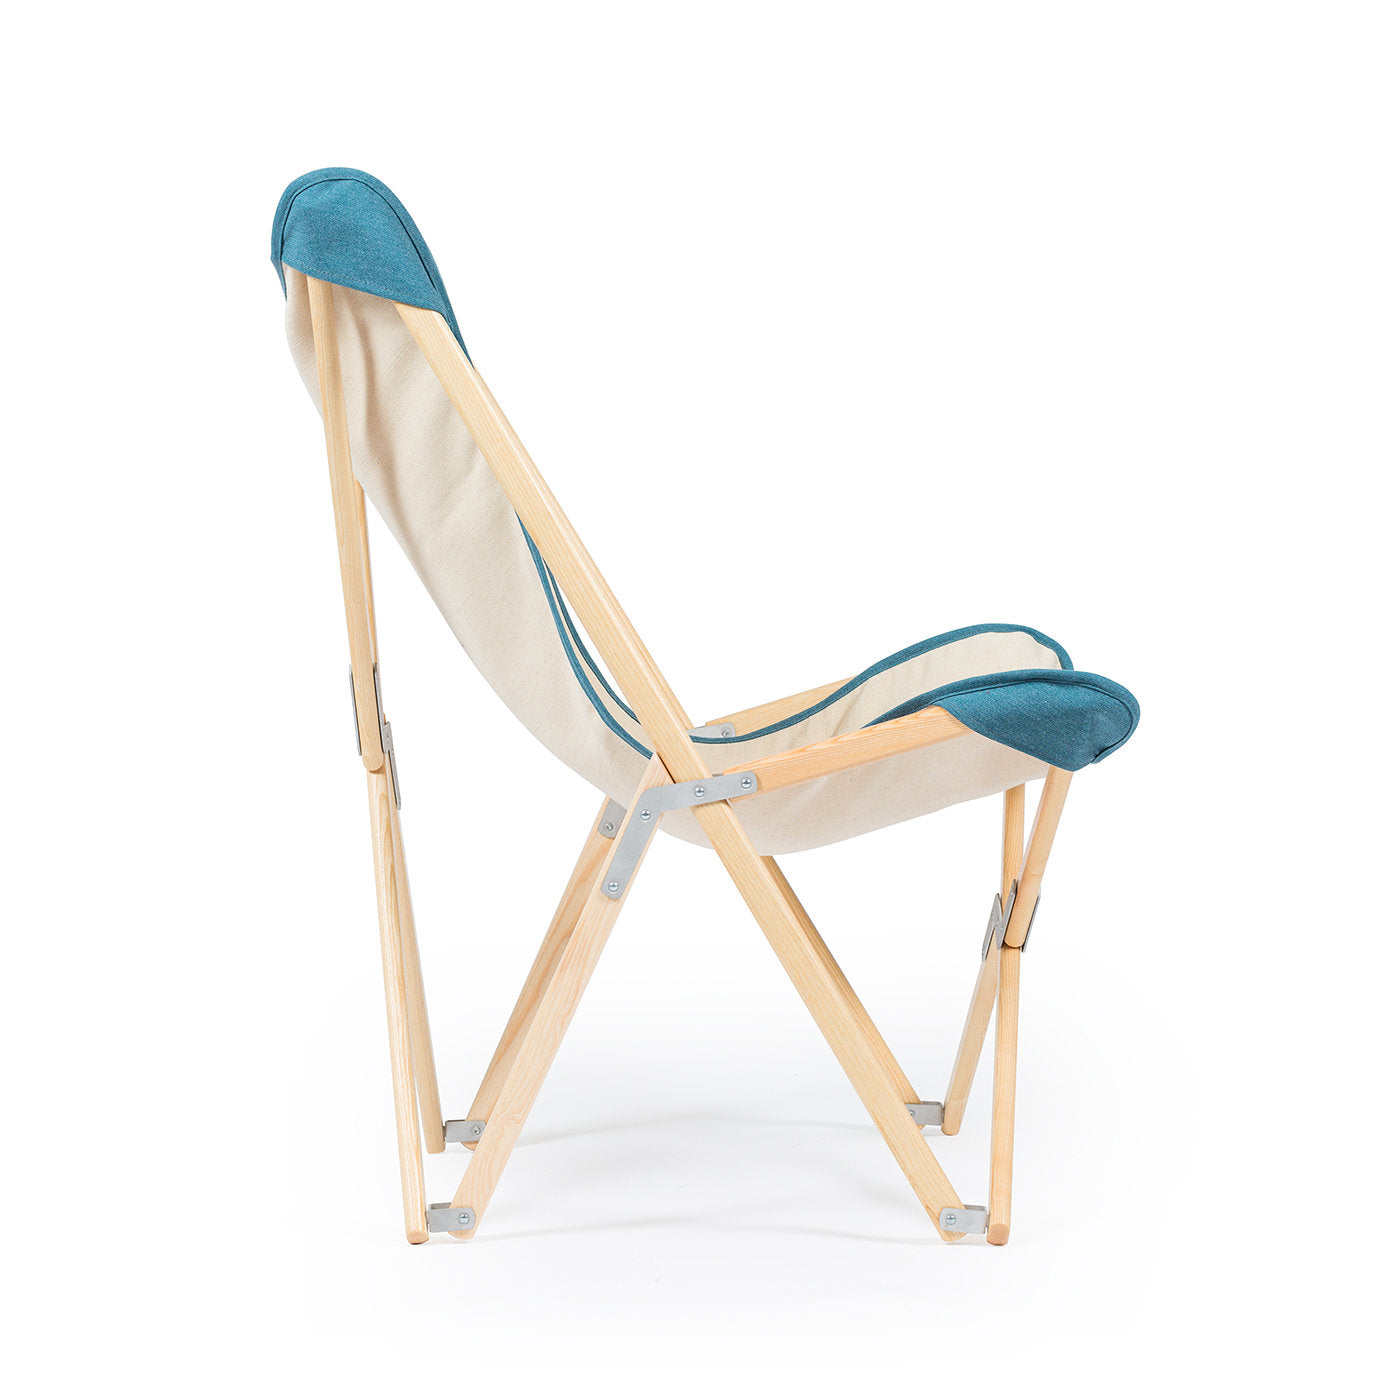 Tripolina Armchair in Cream and Teal Blue - Alternative view 2